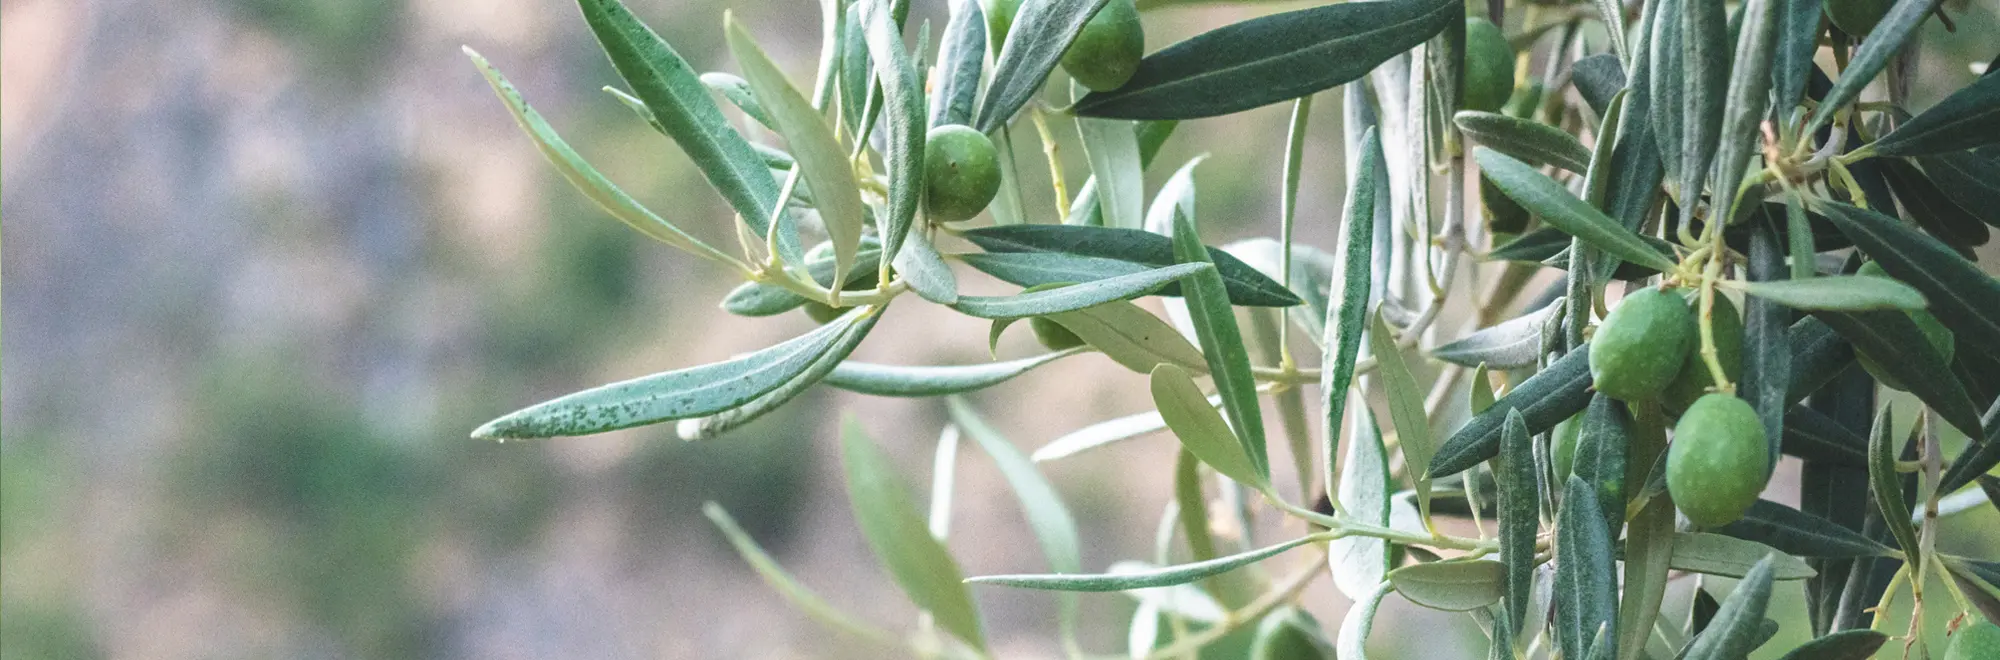 Where is Spanish extra virgin olive oil produced?